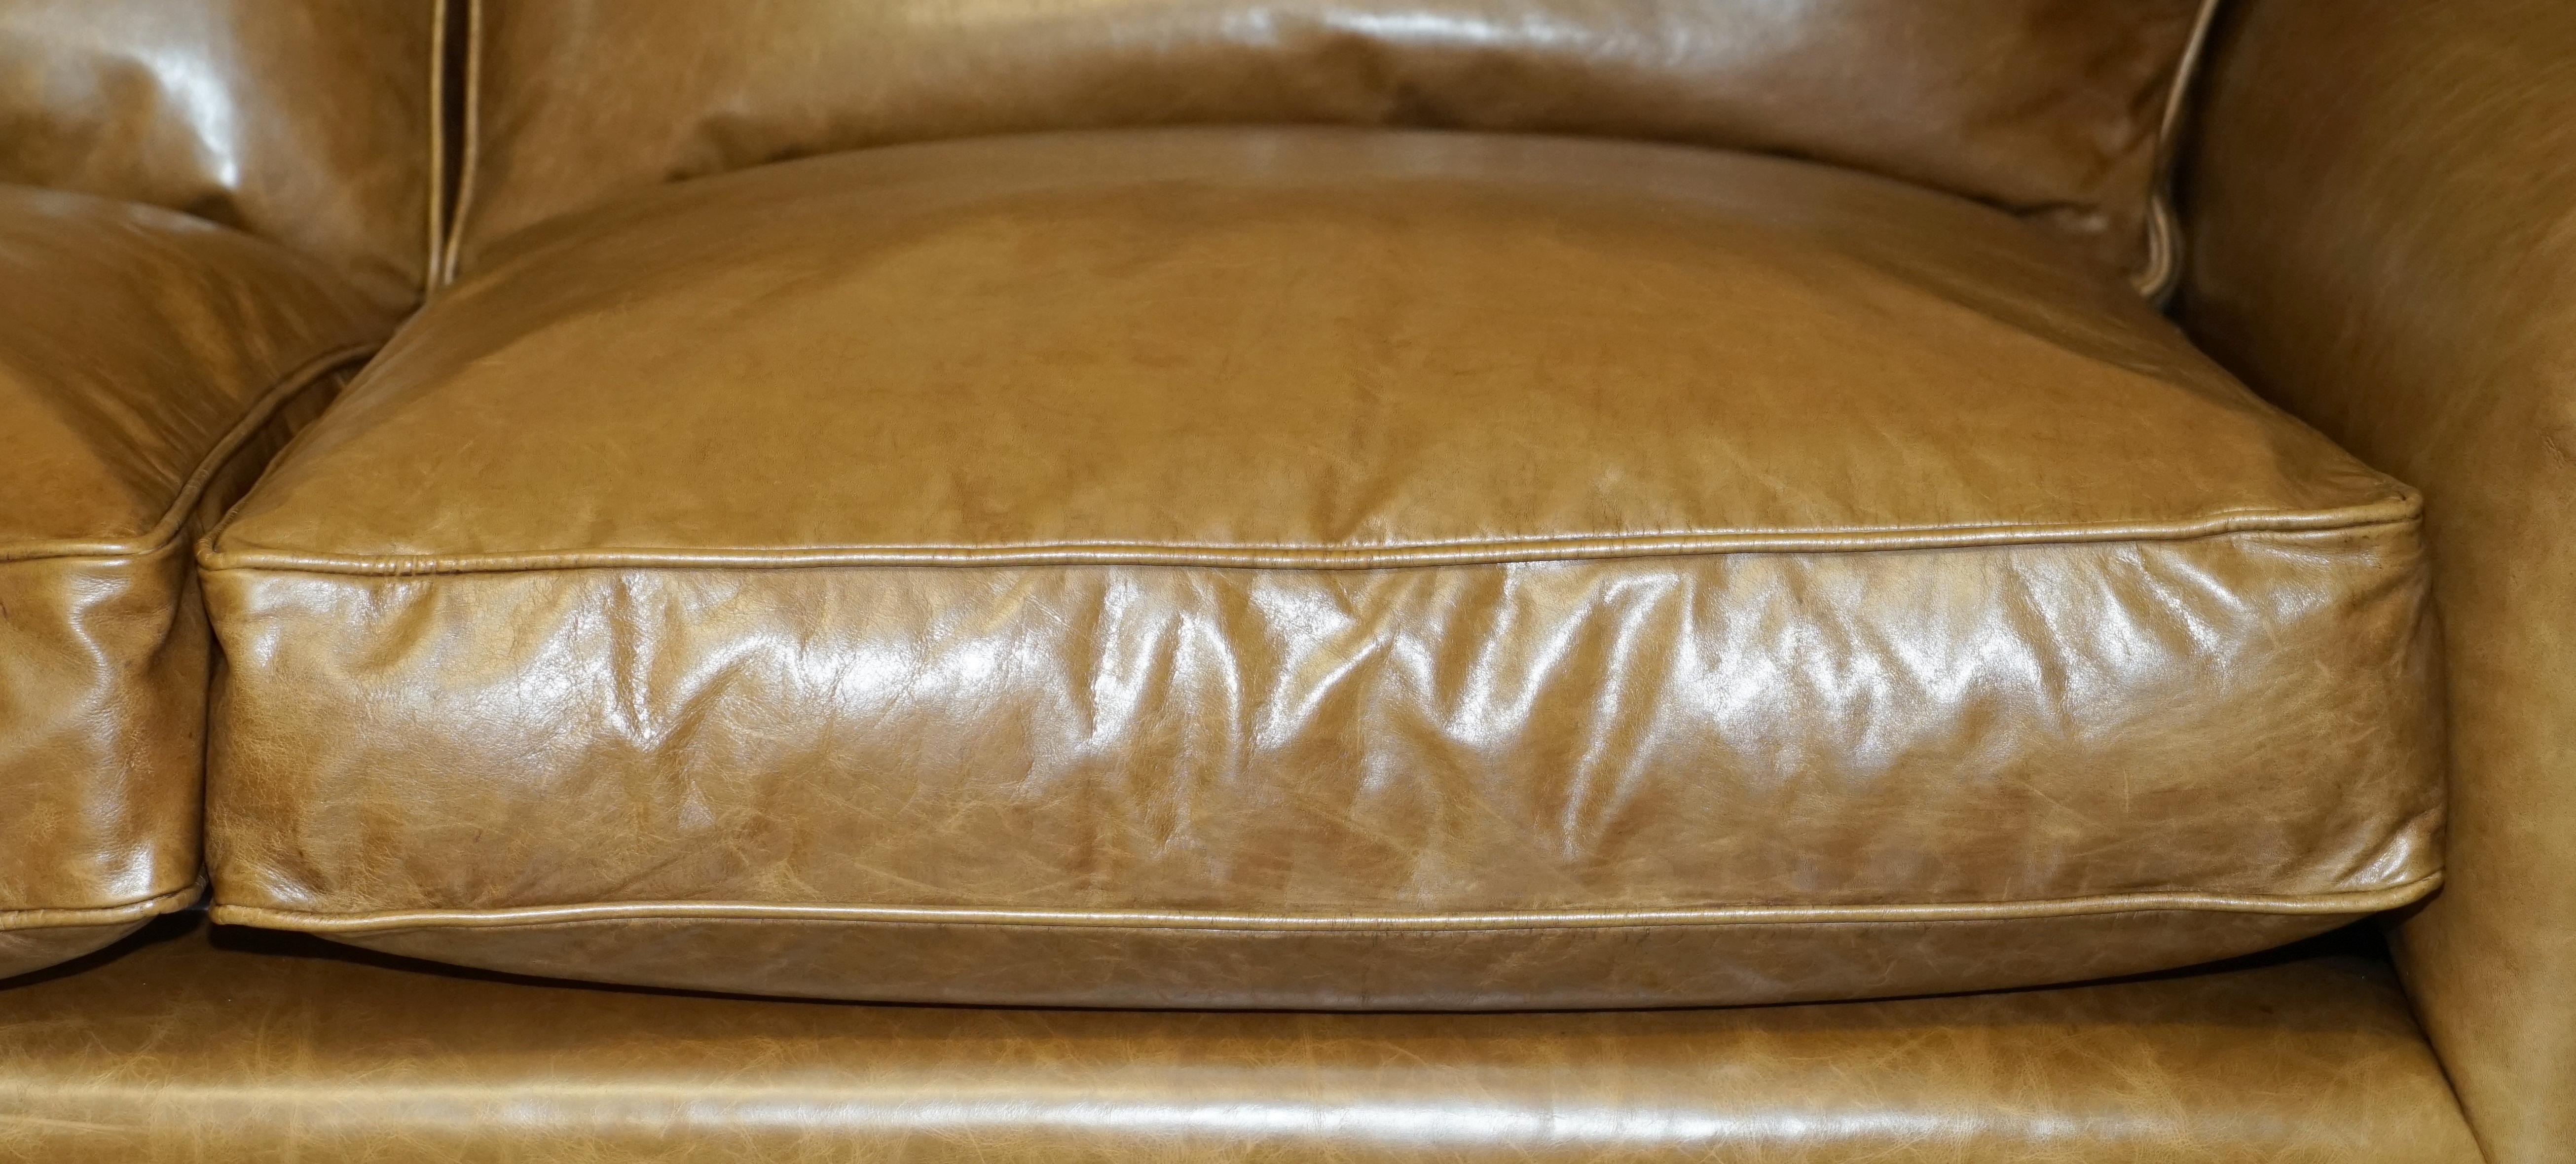 LOVELY GEORGE SMITH SCROLL CUSHiON BACK BROWN LEATHER SOFA en vente 4